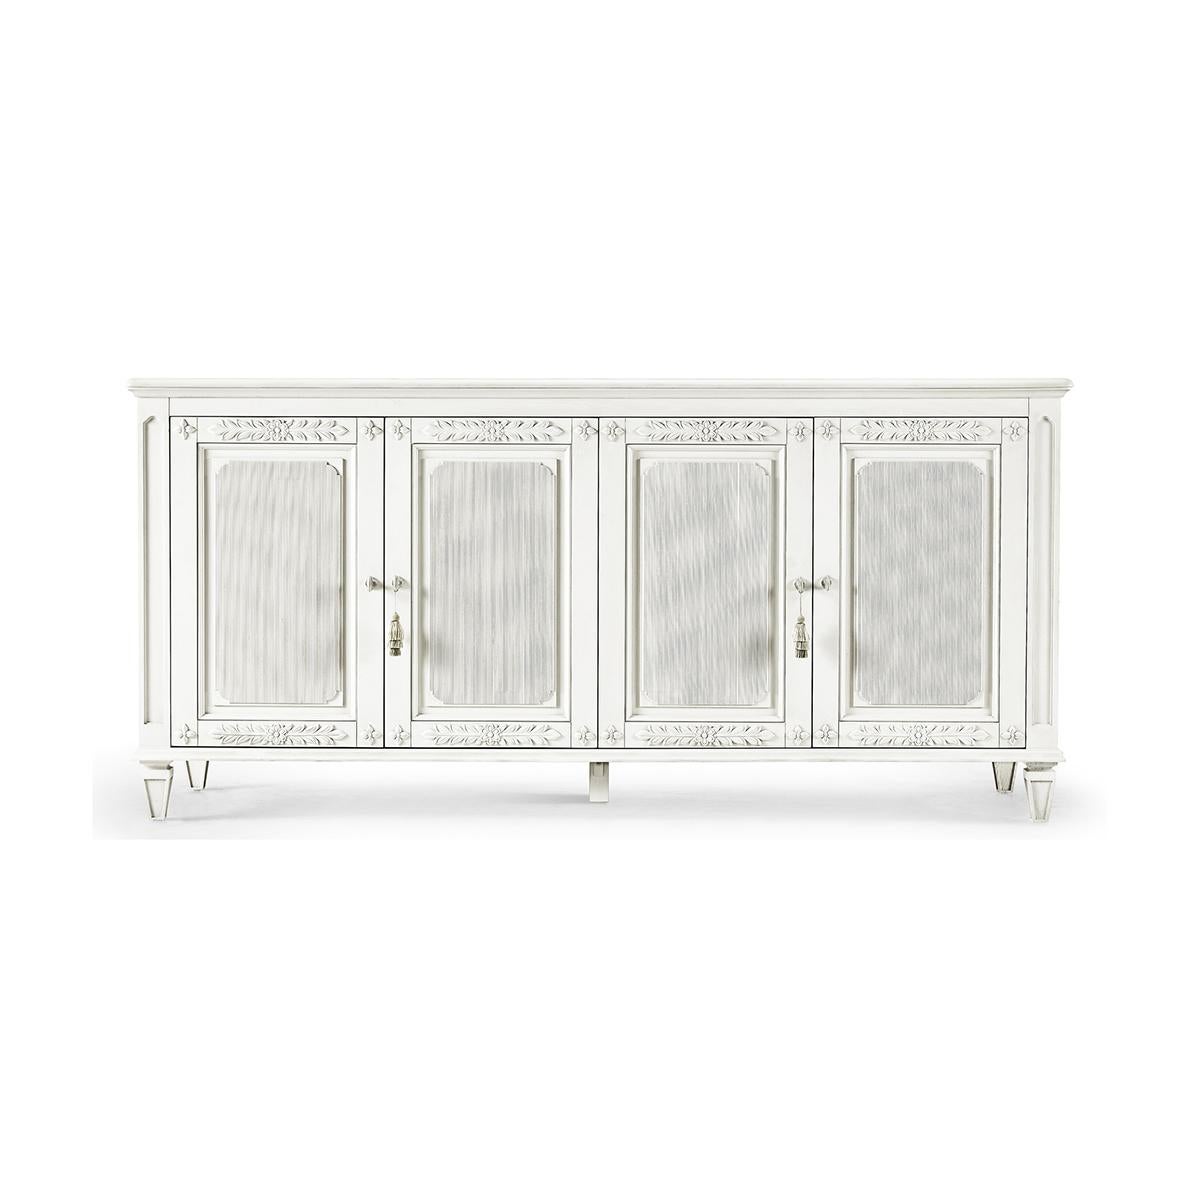 Swedish neoclassic painted buffet, elegant form and functionality. With four neoclassical-style doors with hand-carved floral trim open to a pair of drawers and adjustable shelving with removable dividers on the right for added versatility.

The